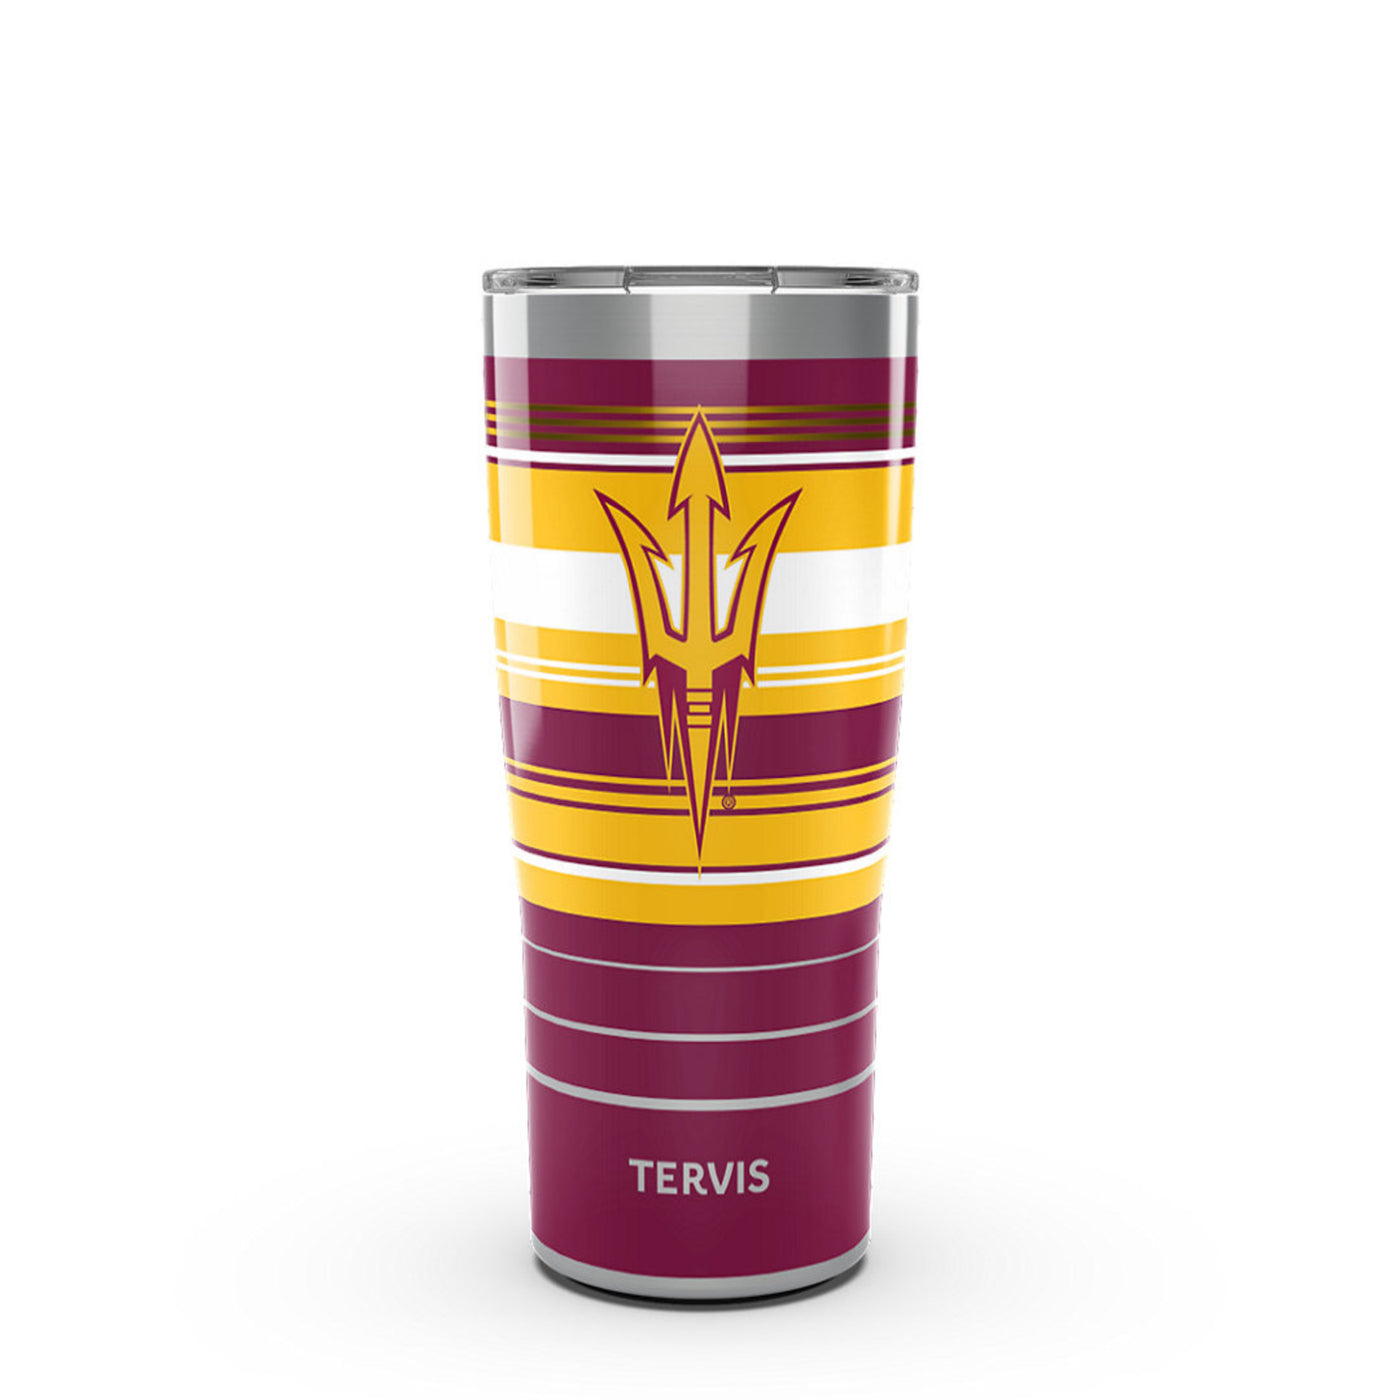 ASU striped tervis tumblr. The stripes are maroon ,gold, and white. On the center of the cup is a gold and maroon pitchfork logo. 